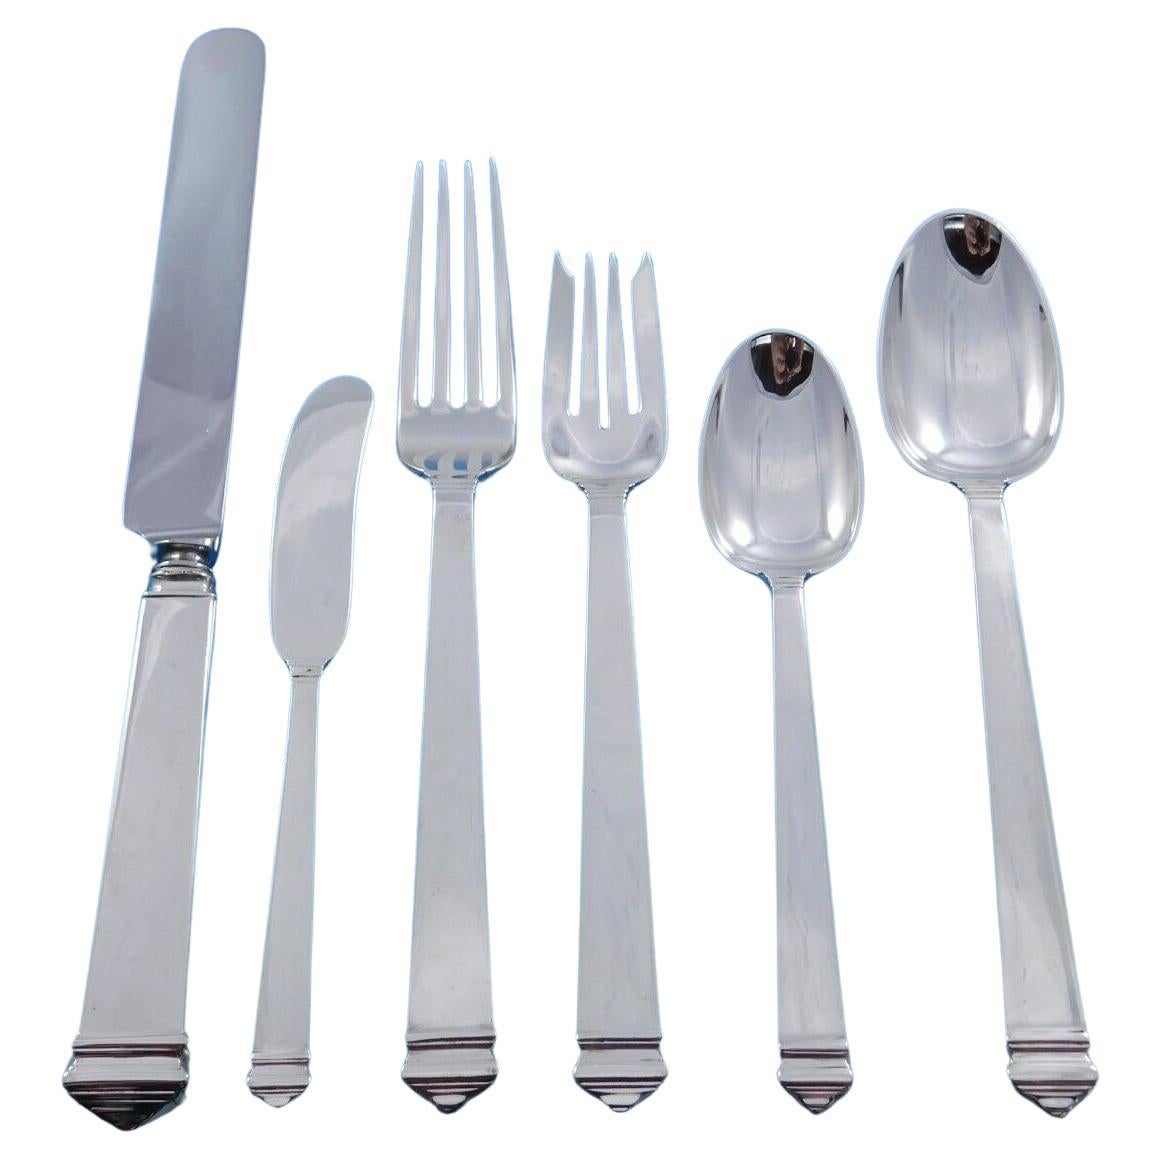 Hampton by Tiffany Sterling Silver Flatware Set for 8 Service 48 pcs Dinner